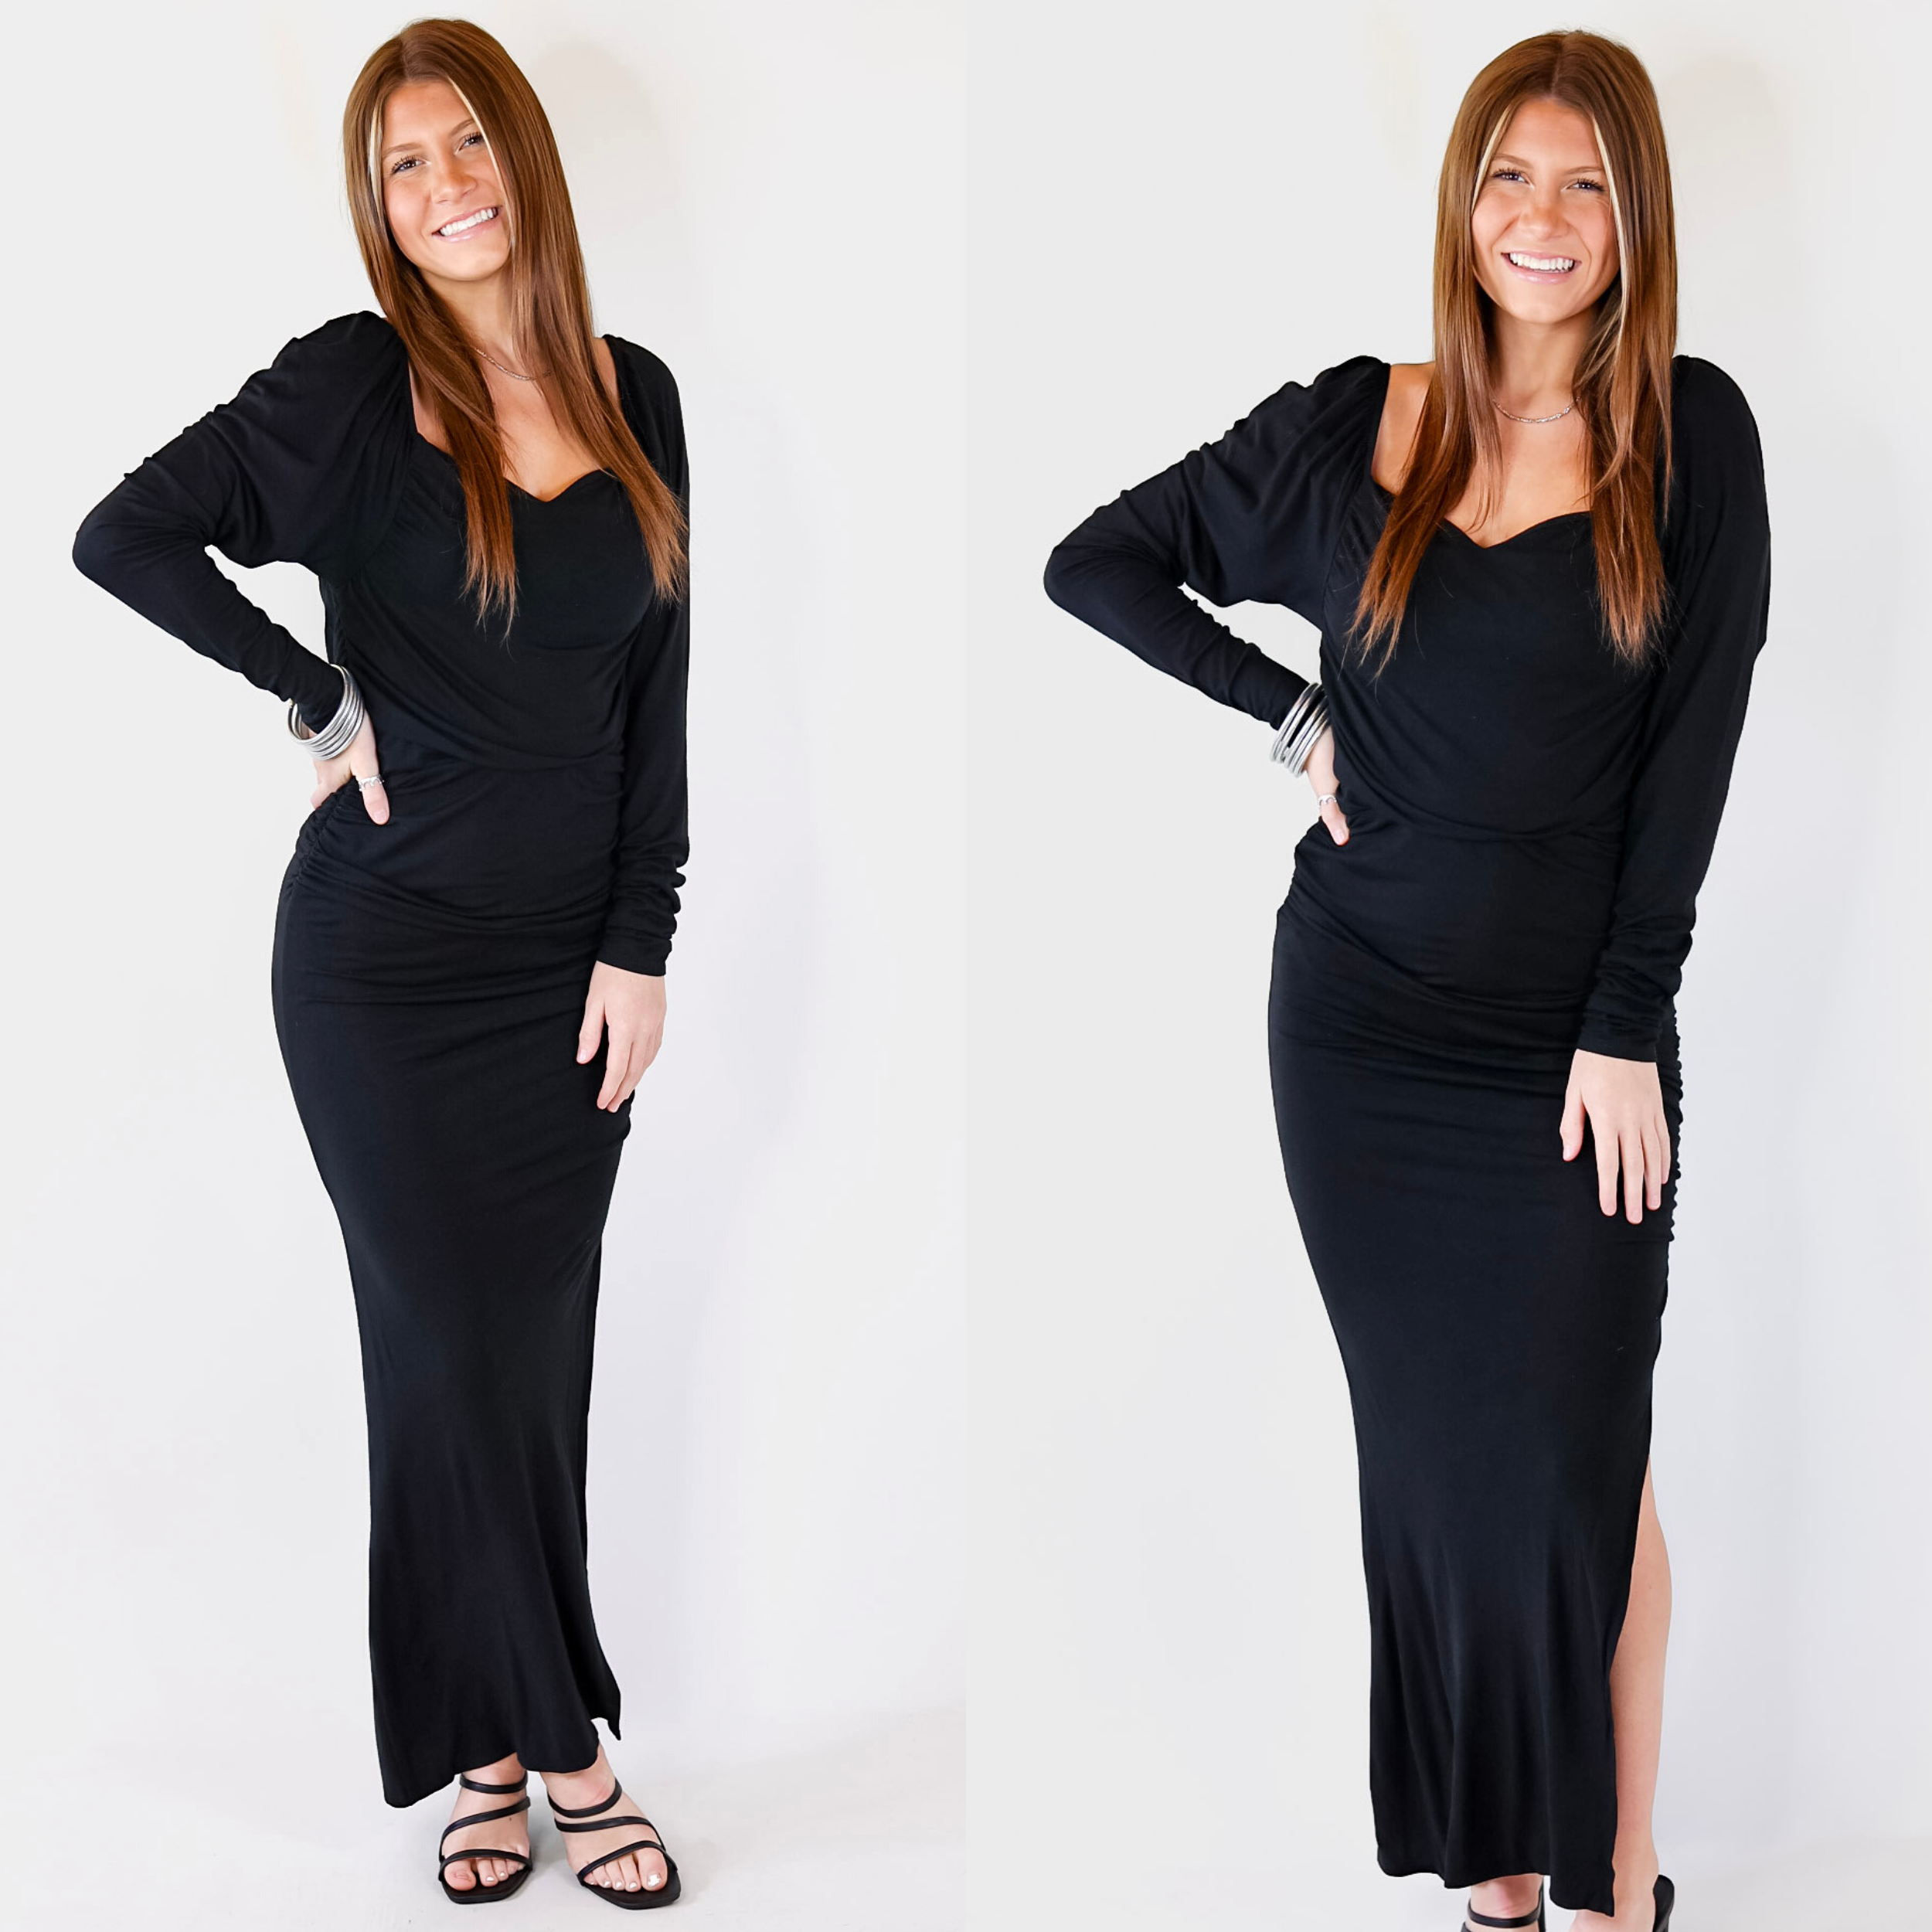 Classy Girl Long Sleeve Sweetheart Neckline Maxi Dress in Black - Giddy Up Glamour Boutique